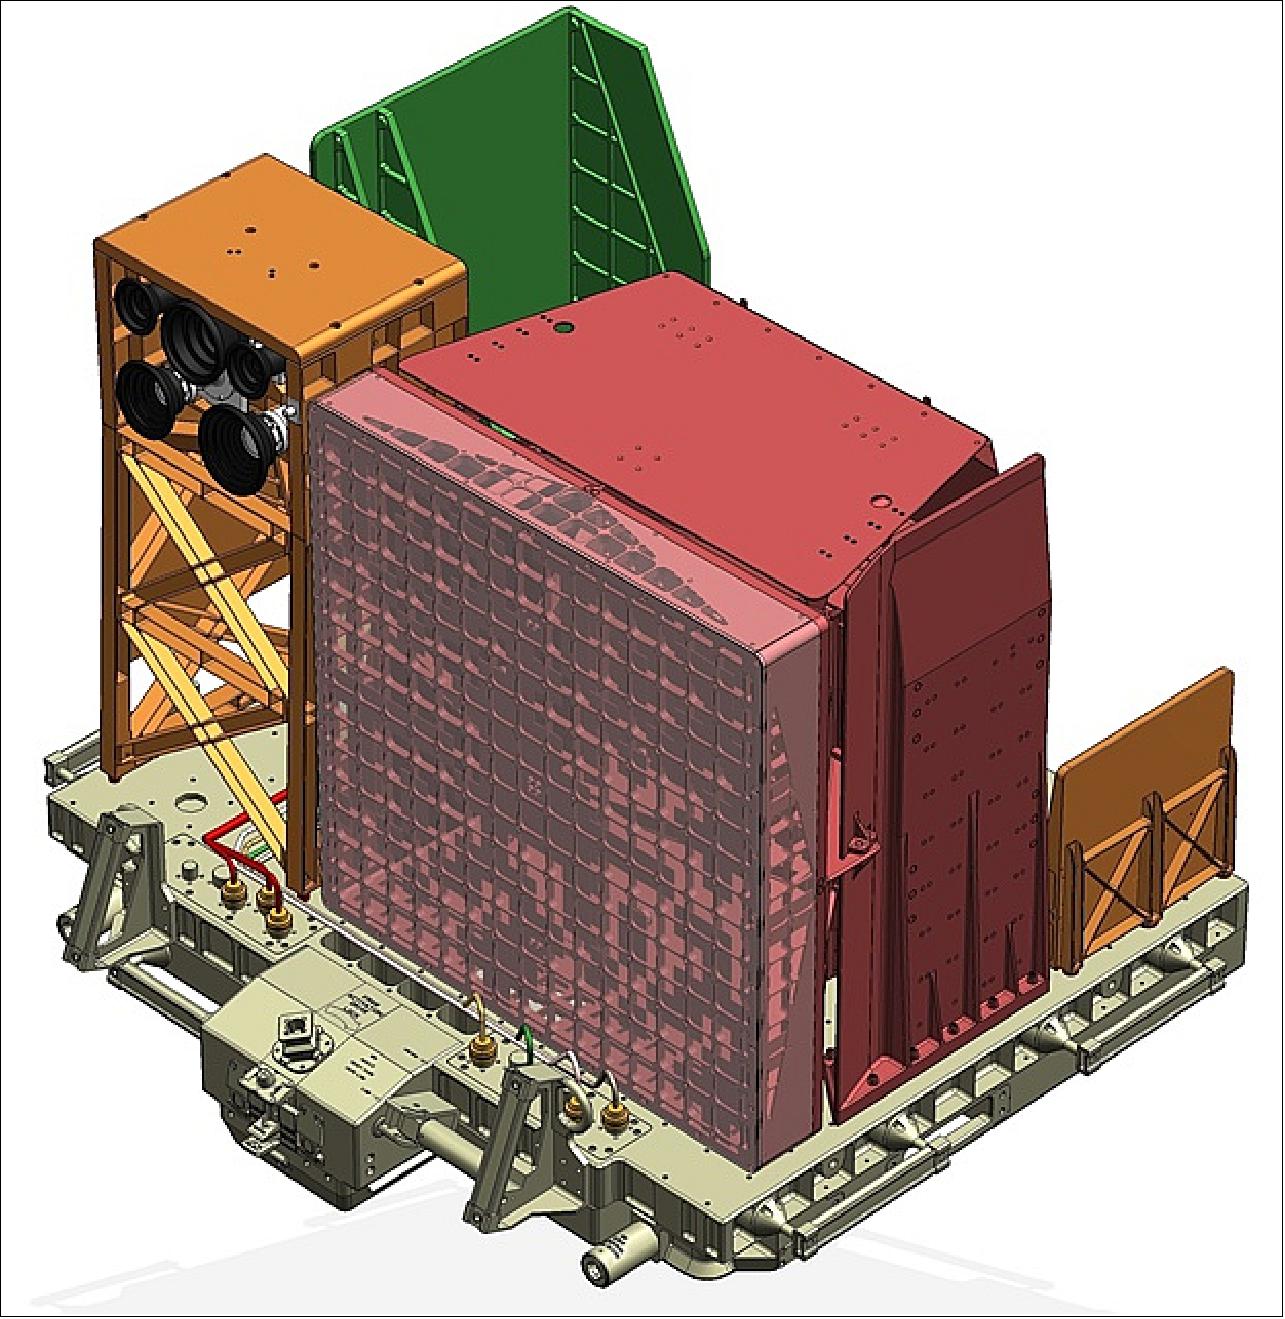 Figure 25: Layout of the ASIM instrument assembly (image credit: ASIM collaboration)